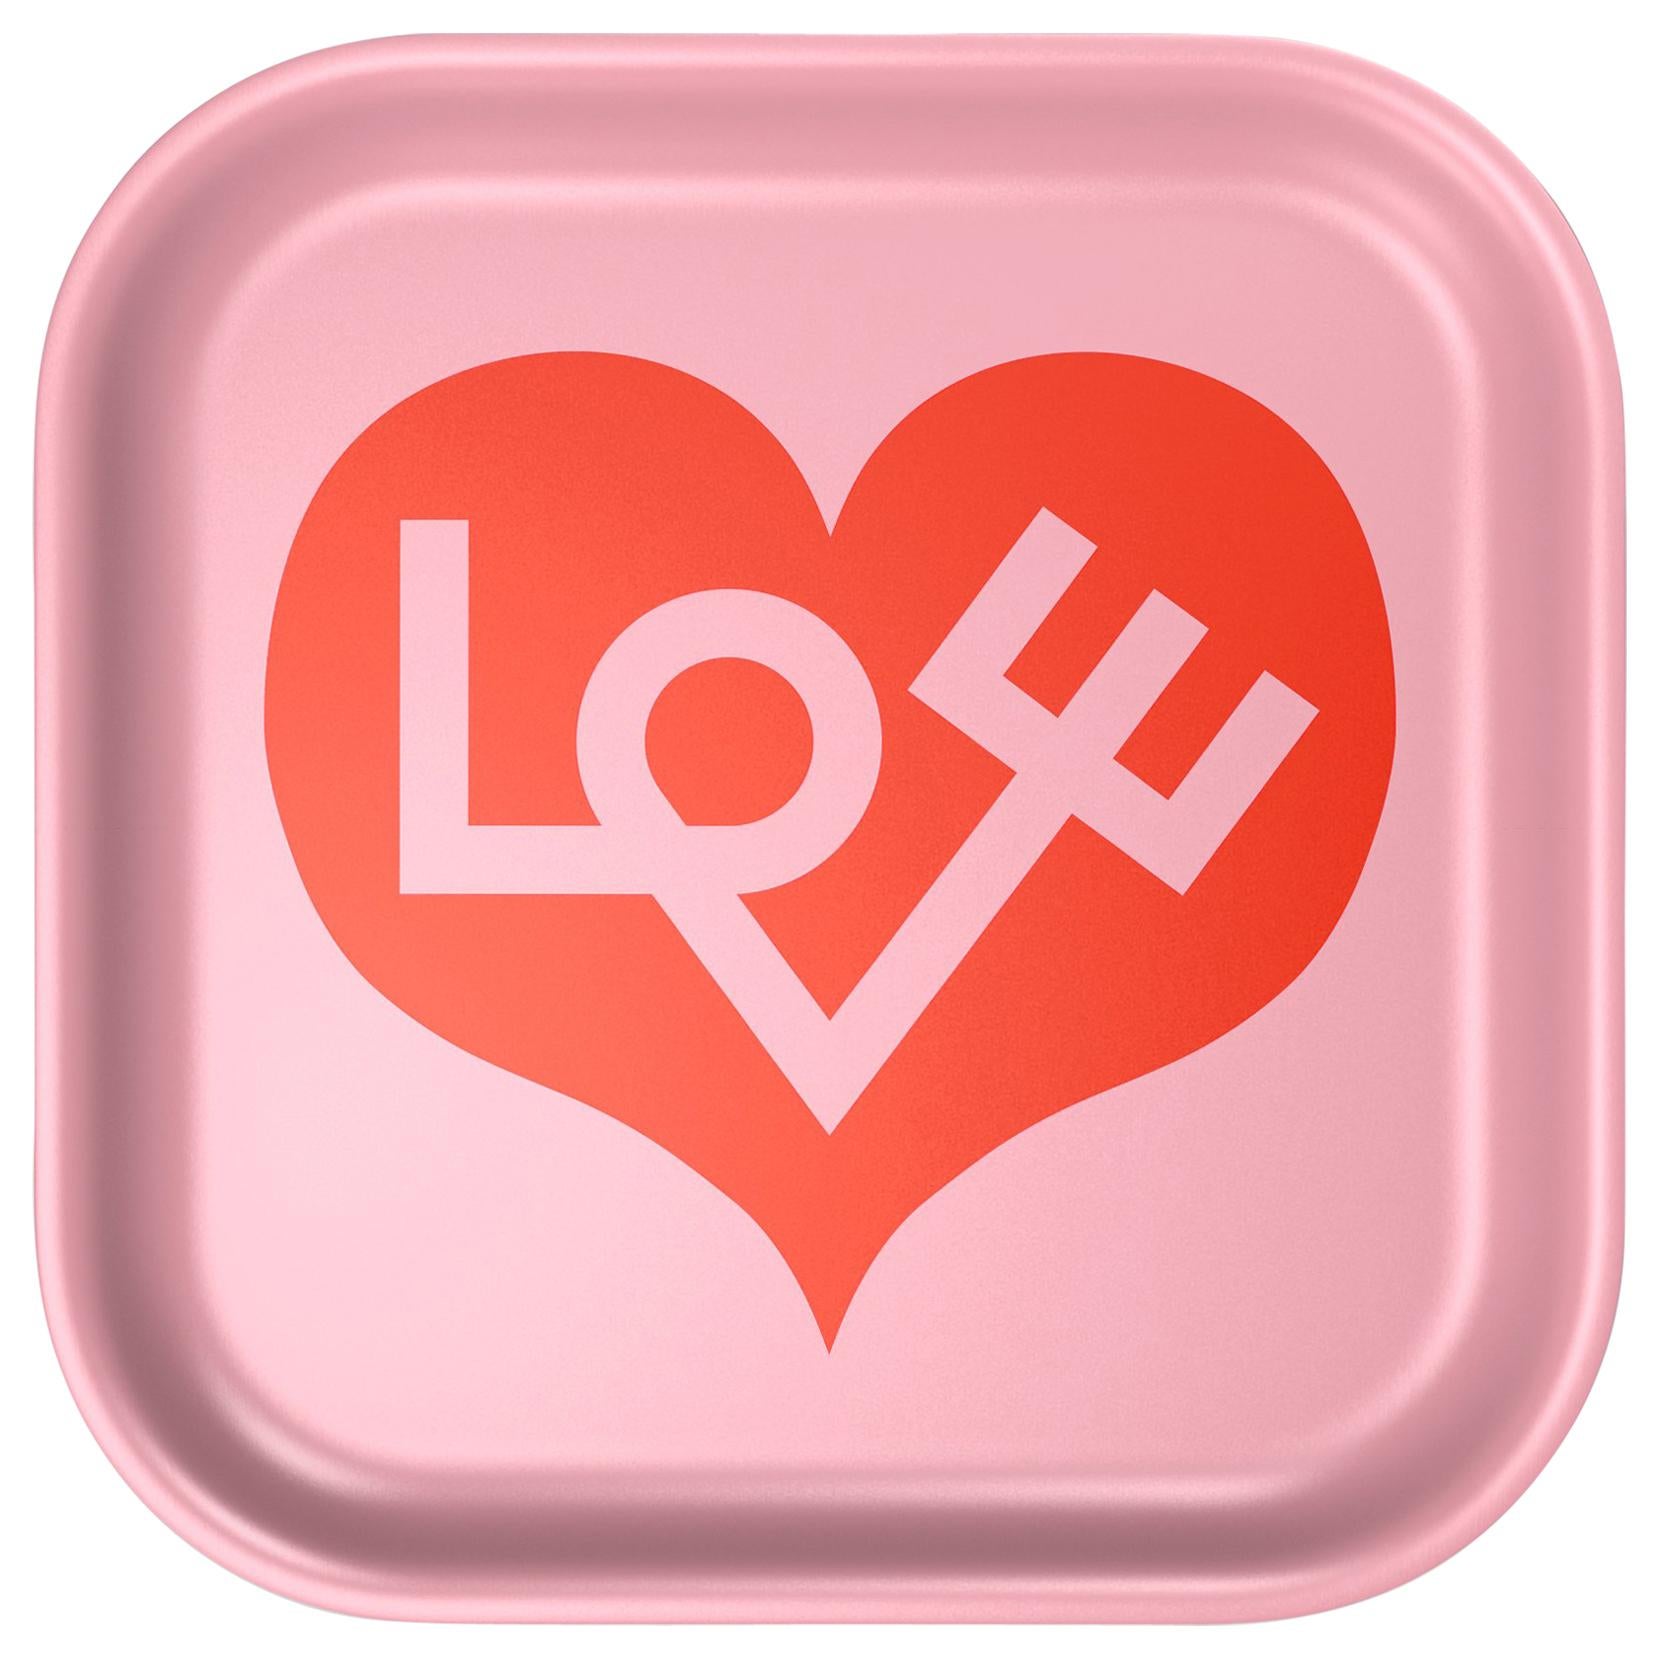 Vitra Small Classic Tray in Love Heart Design by Alexander Girard For Sale